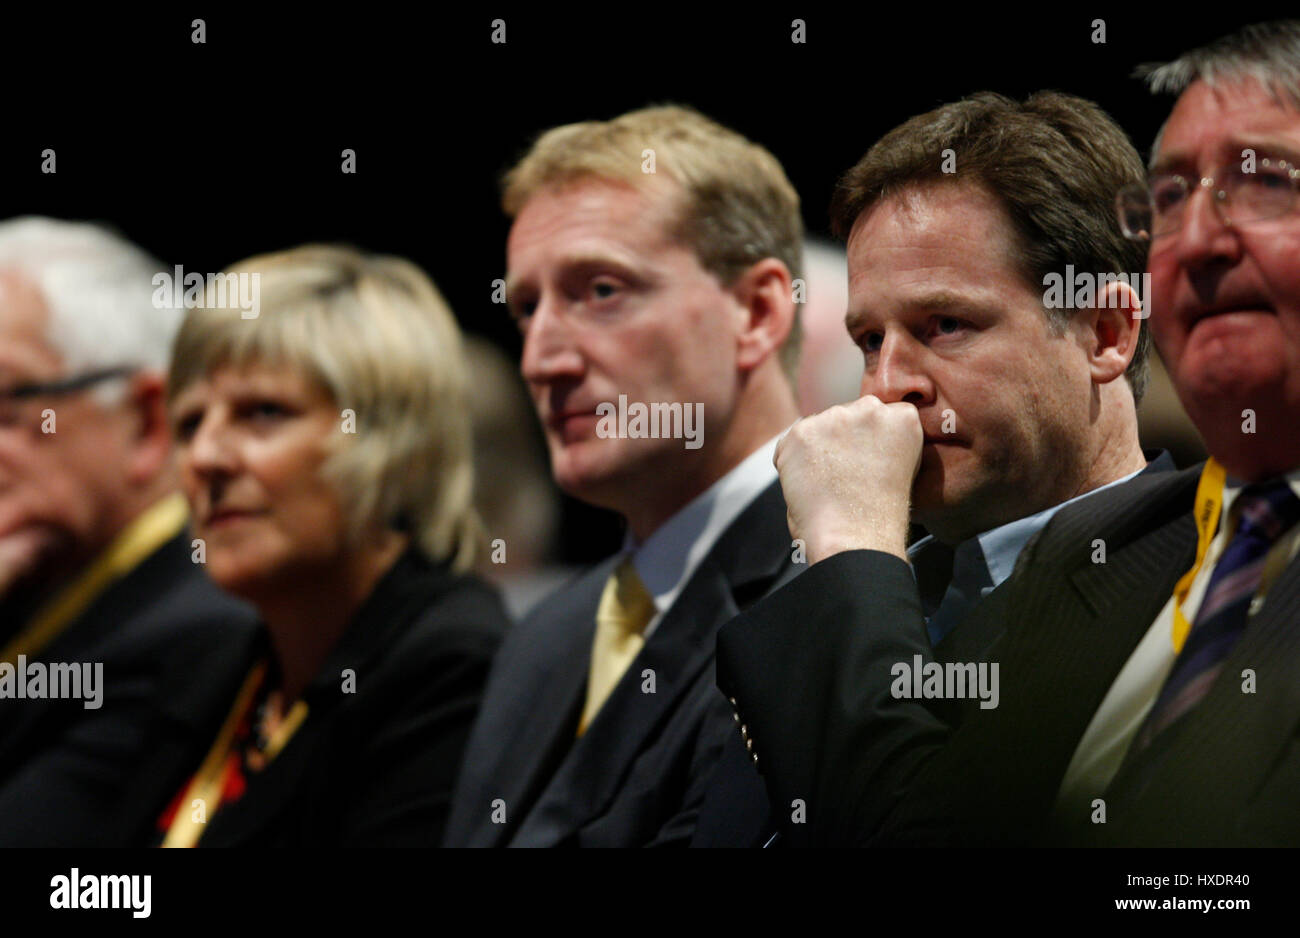 NICK CLEGG MP DEPUTY PRIME MINISTER 20 September 2010 THE ACC LIVERPOOL ENGLAND Stock Photo